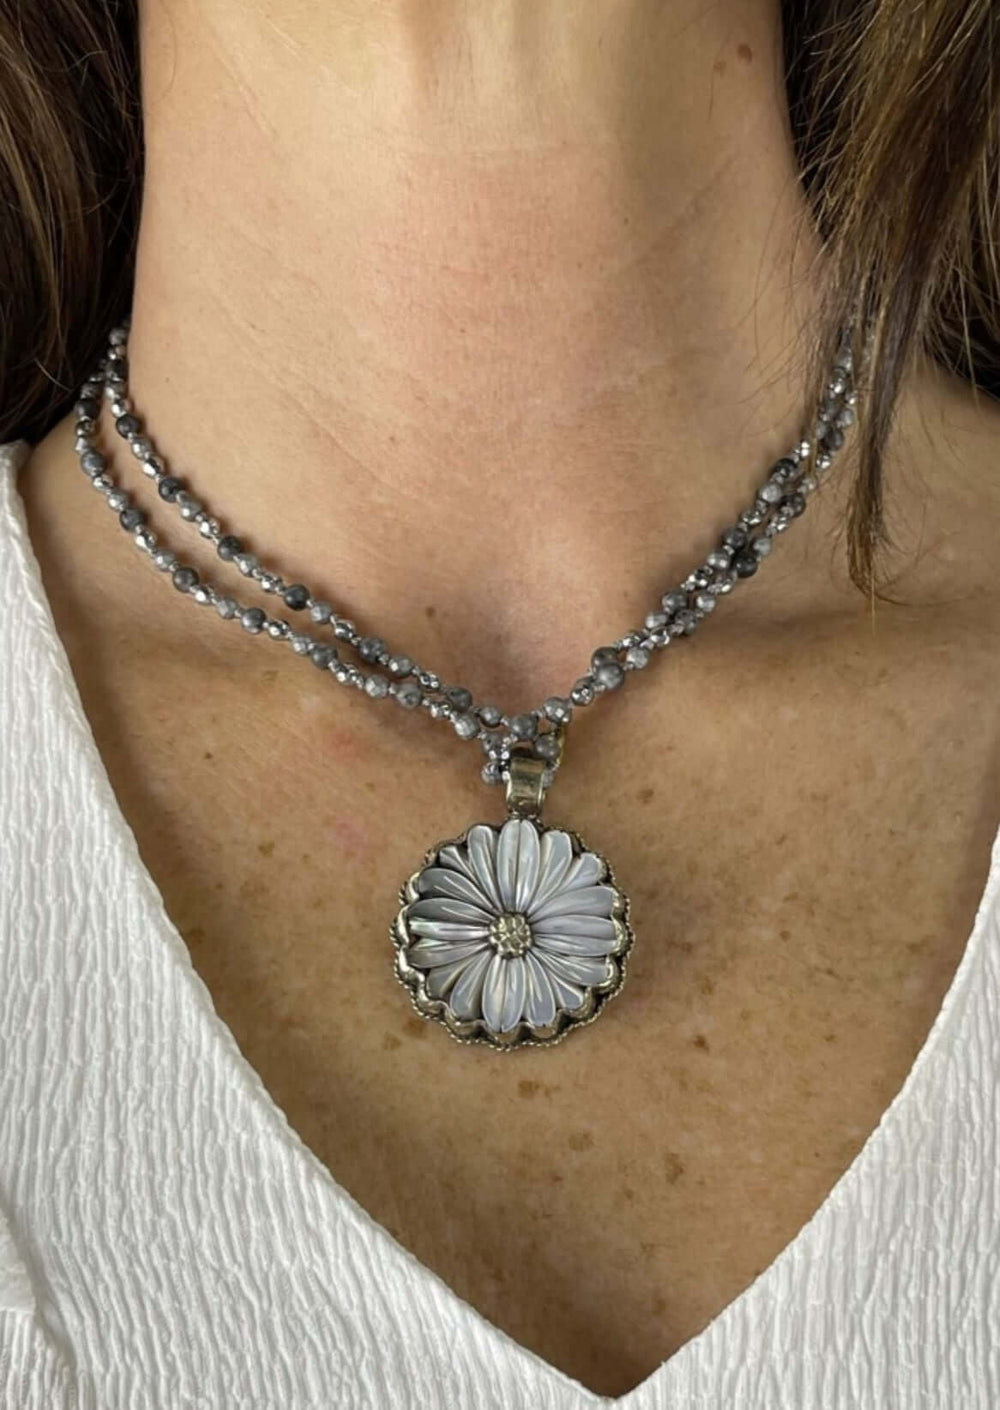 USA Made Mother of Pearl Daisy Pendant Charm Necklace Wear Long or Short | Fashion Jewelry Handmade in Texas by Carol Su | Made in America Boutique